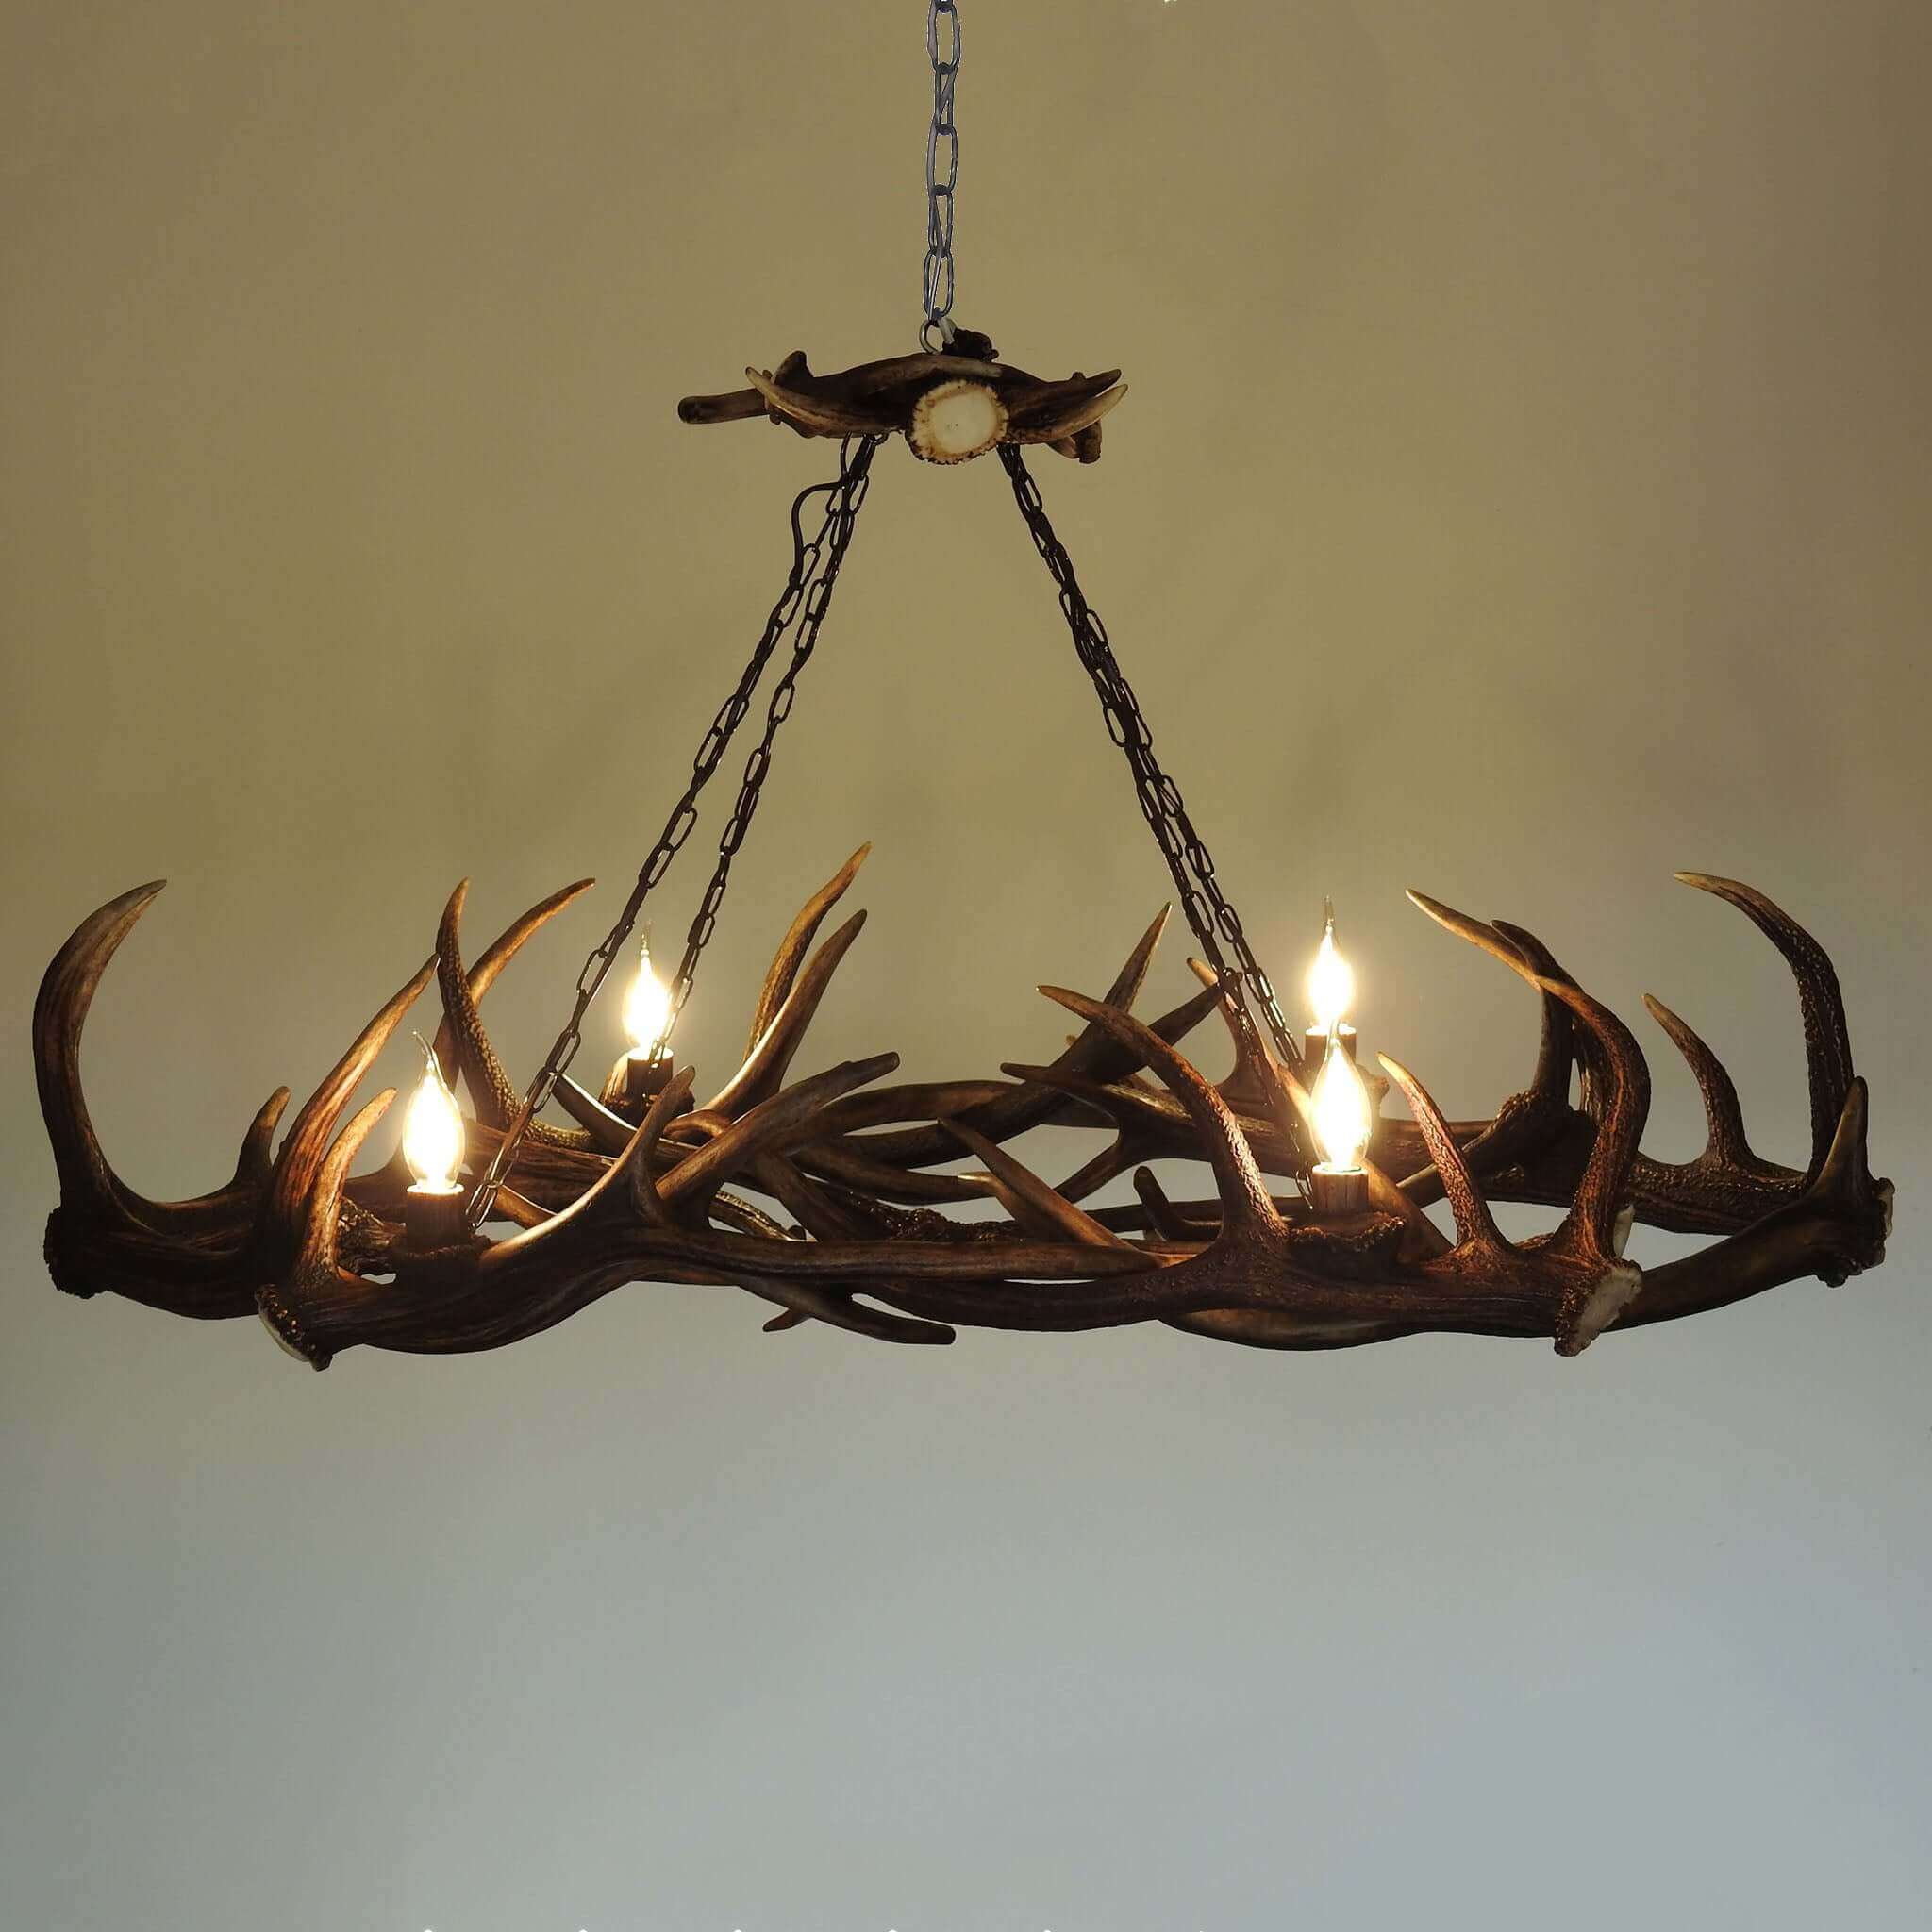 Antler chandelier hanging on chain.